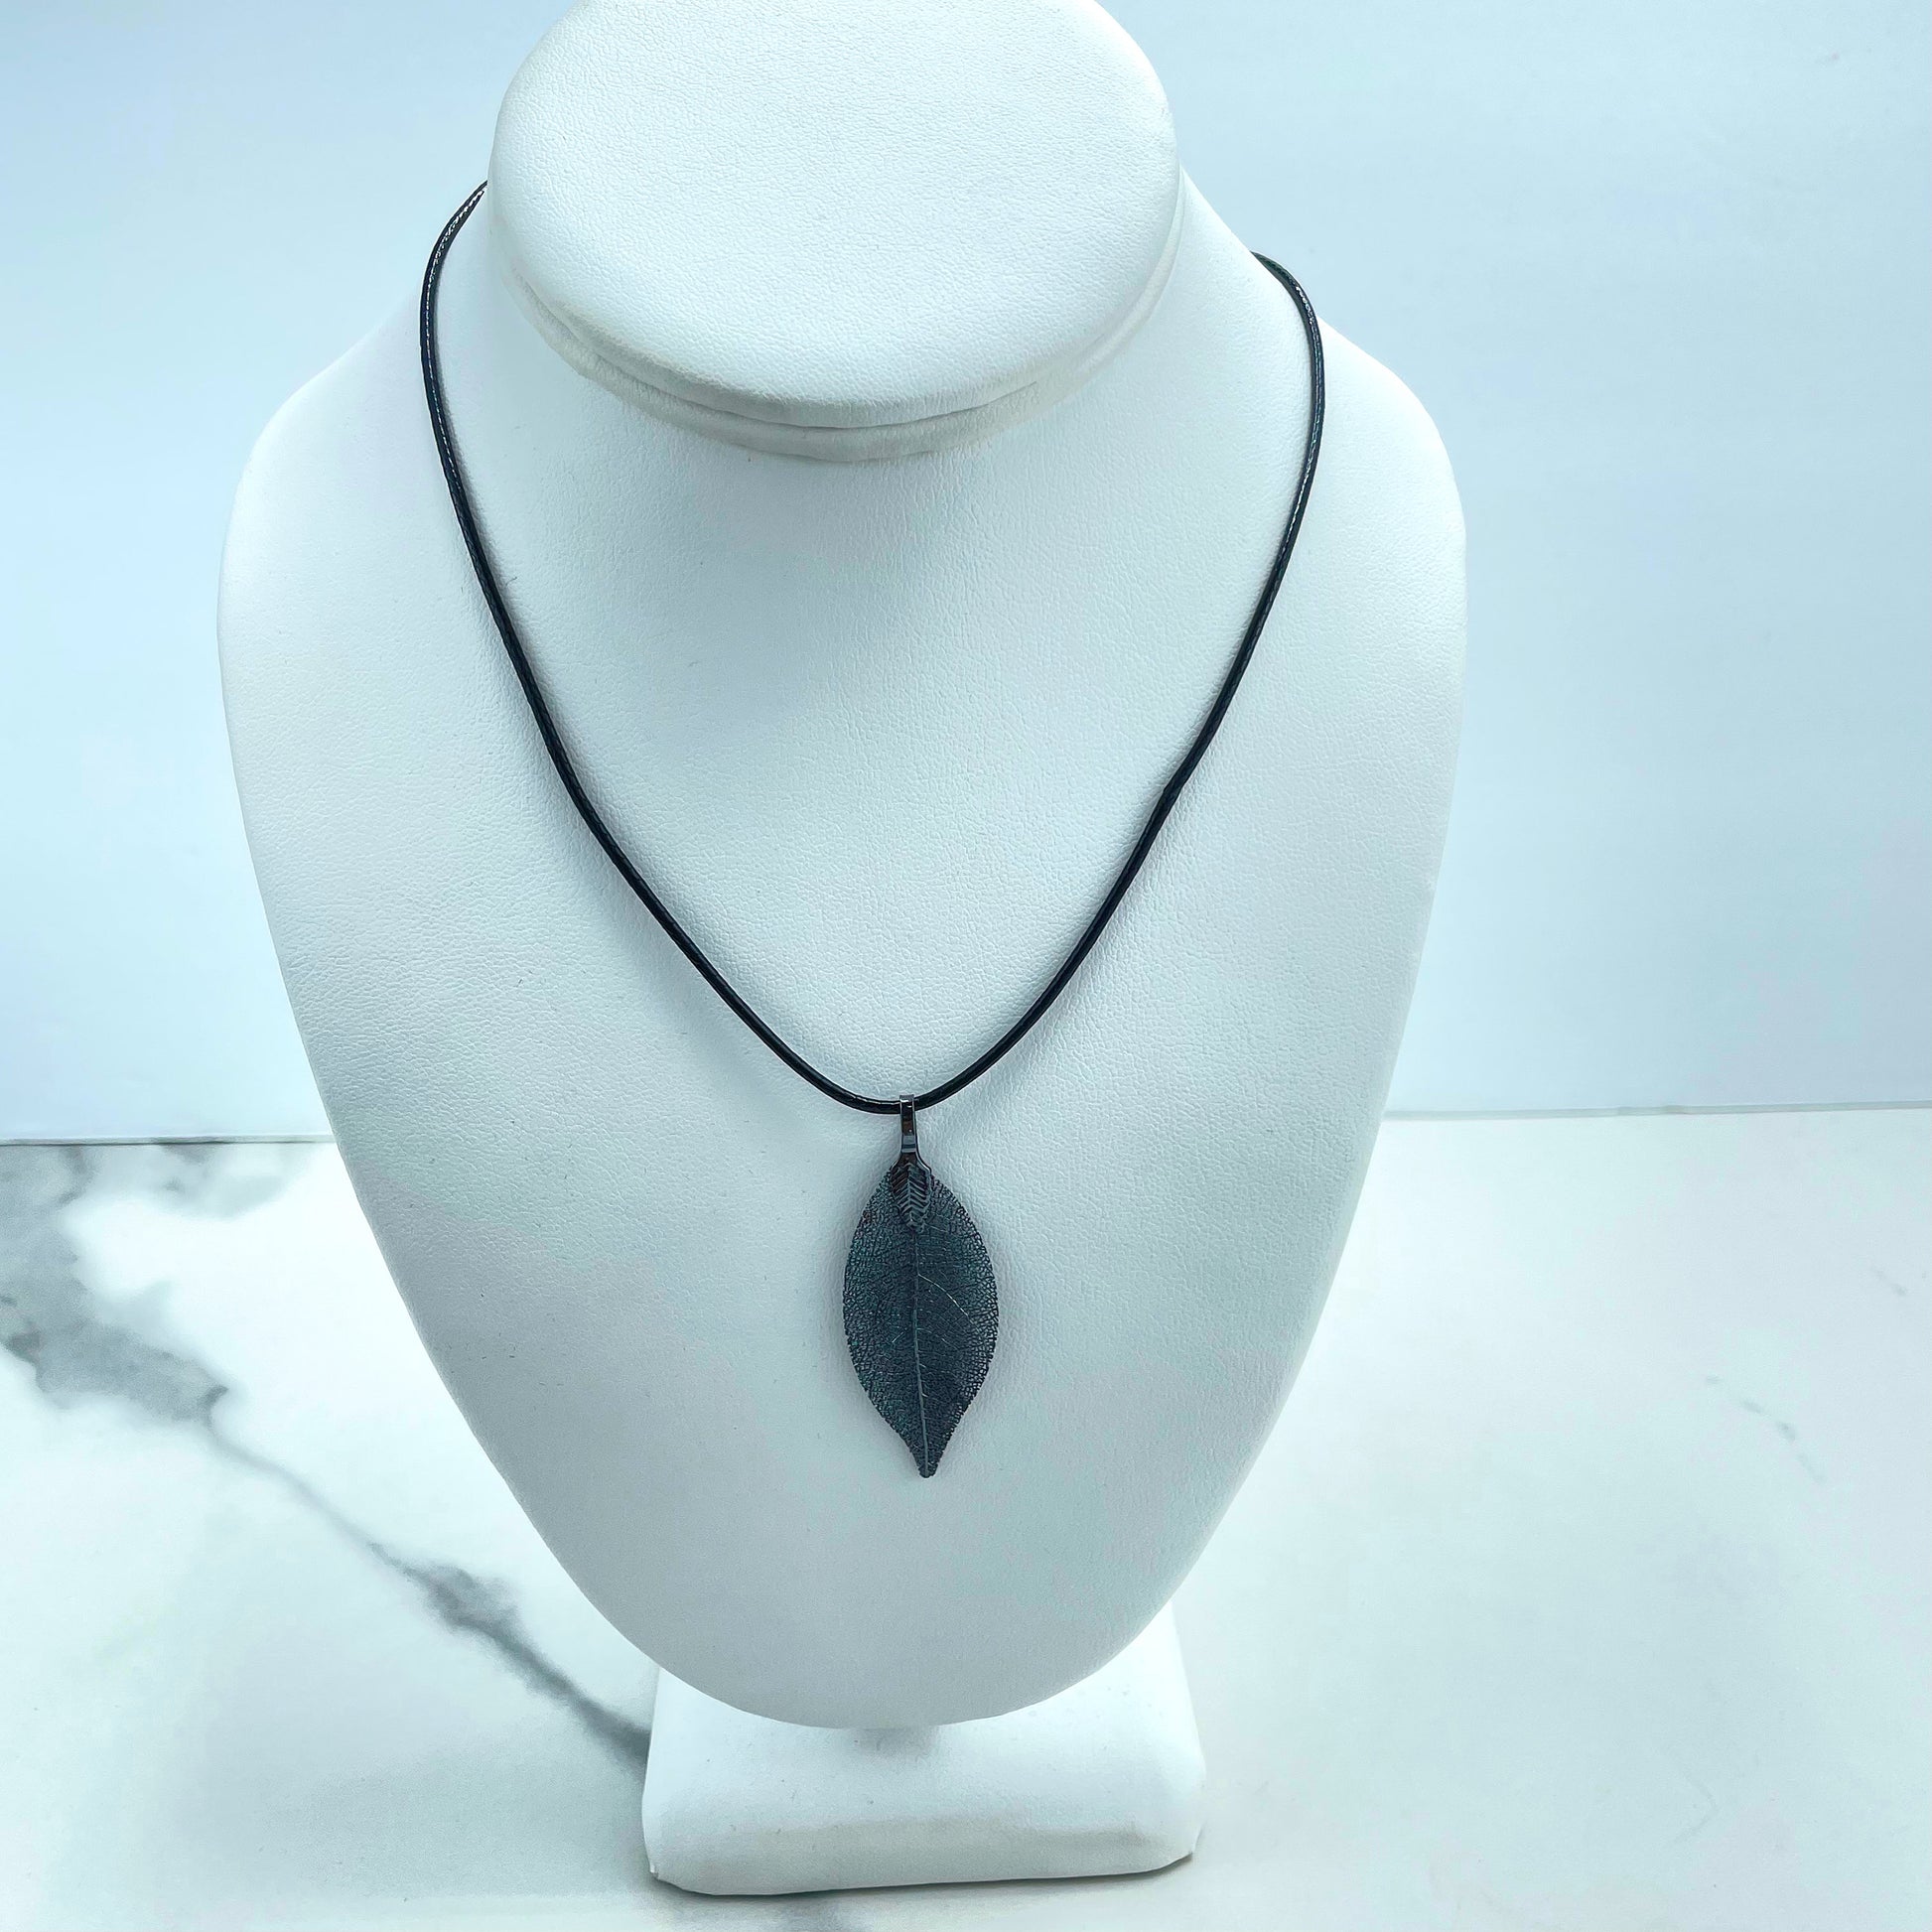 18k Gold Filled, Silver or Black Small Pendant Hand Made with Real Leaf & Black Cord Chain Necklace, Wholesale Jewelry Making Supplies